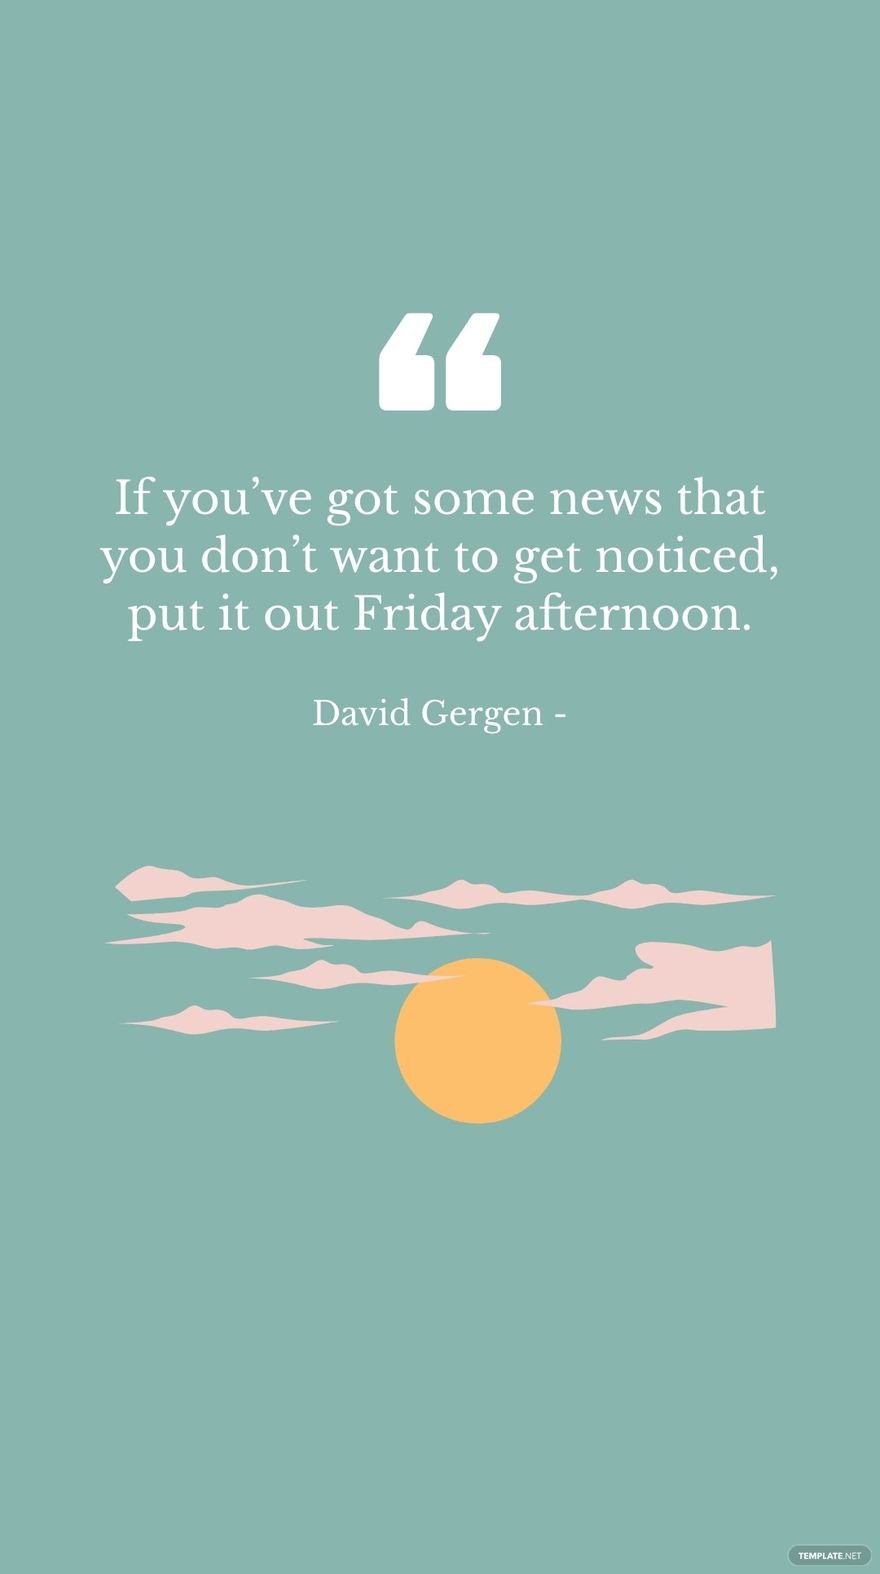 David Gergen - If you’ve got some news that you don’t want to get noticed, put it out Friday afternoon.